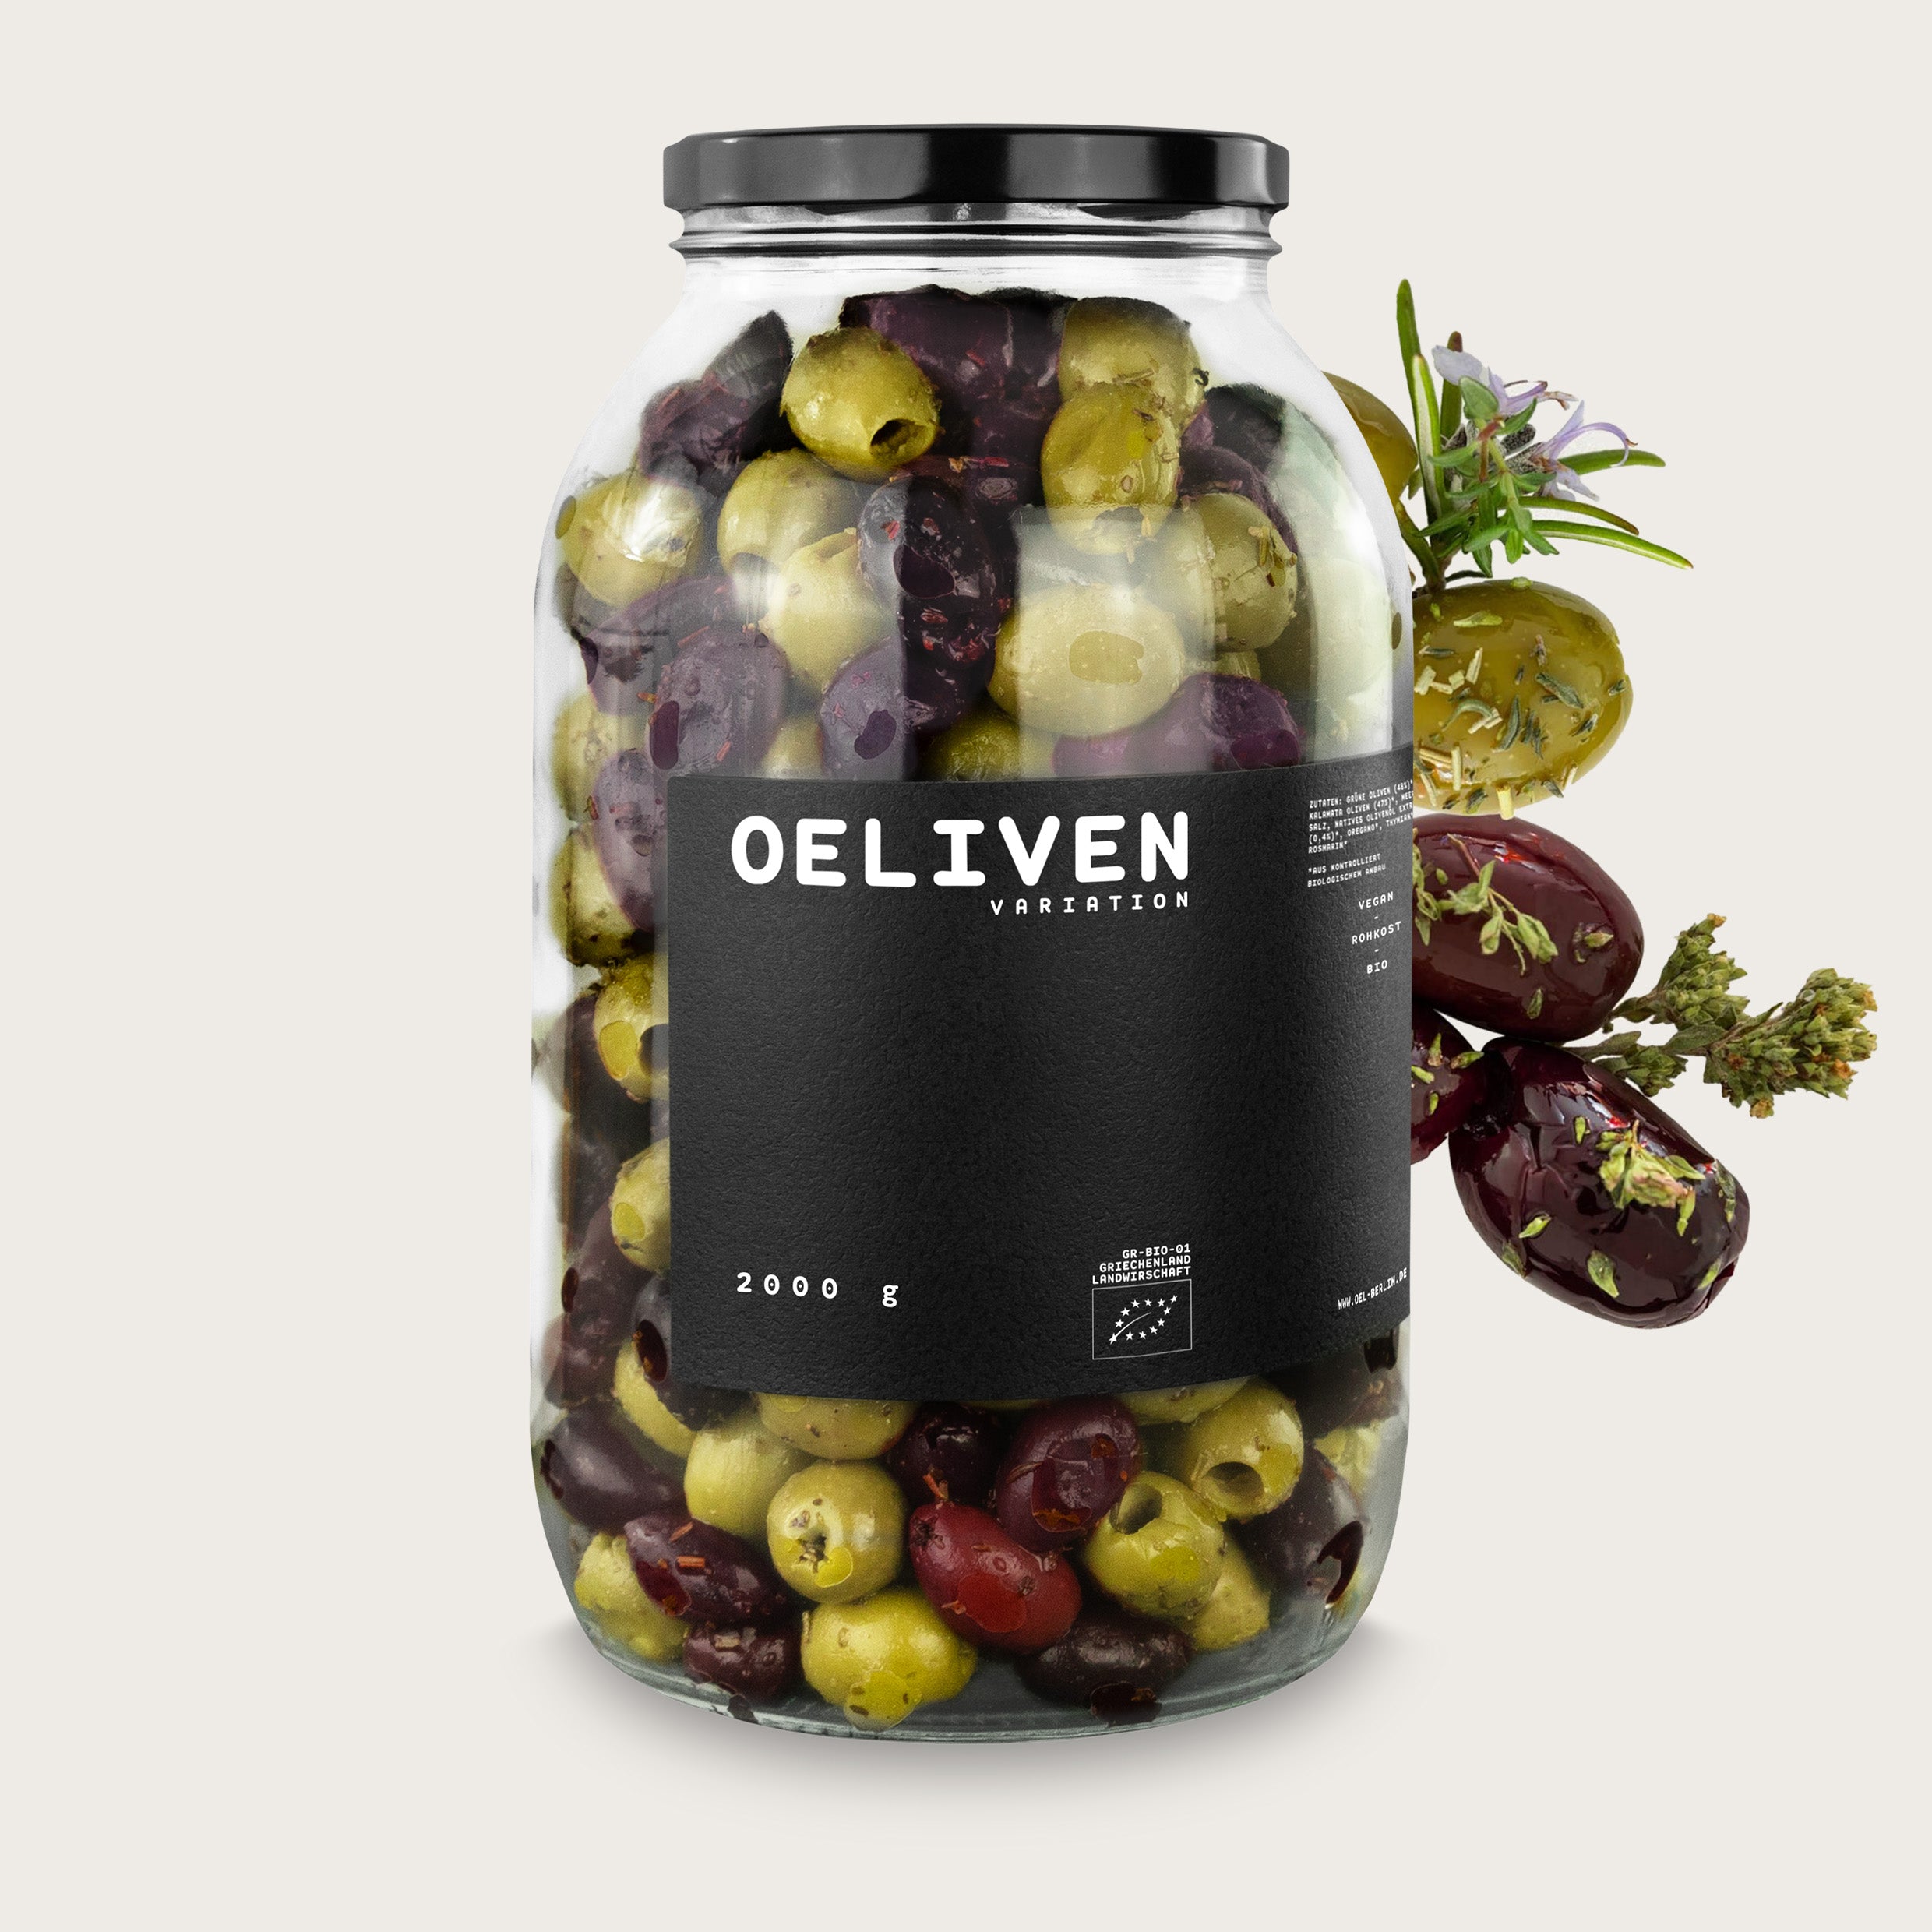 OELiven Mix-Variation 2,000 g - Mixed organic olives with herbs